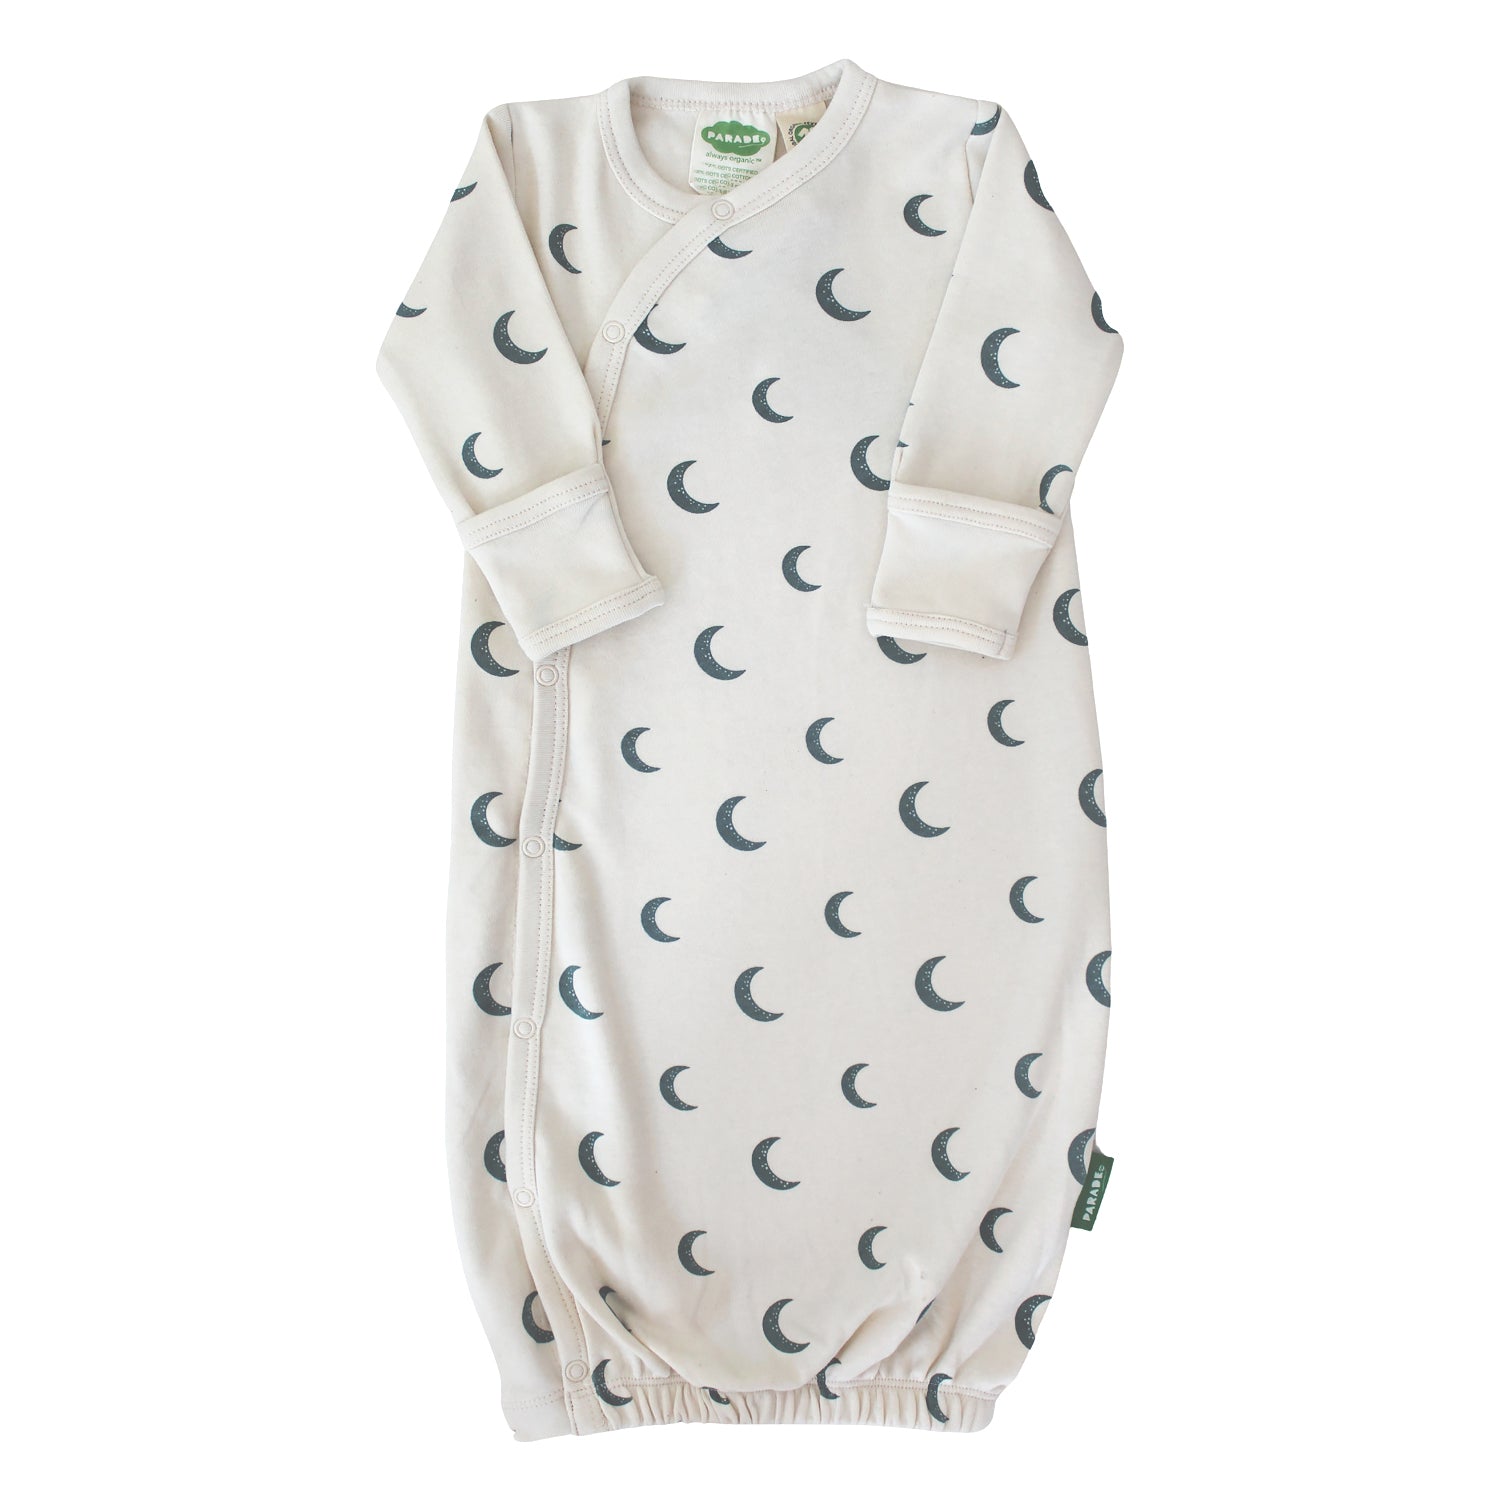 Kimono Gowns - Signature Prints - Organic Baby Clothes, Kids Clothes, & Gifts | Parade Organics